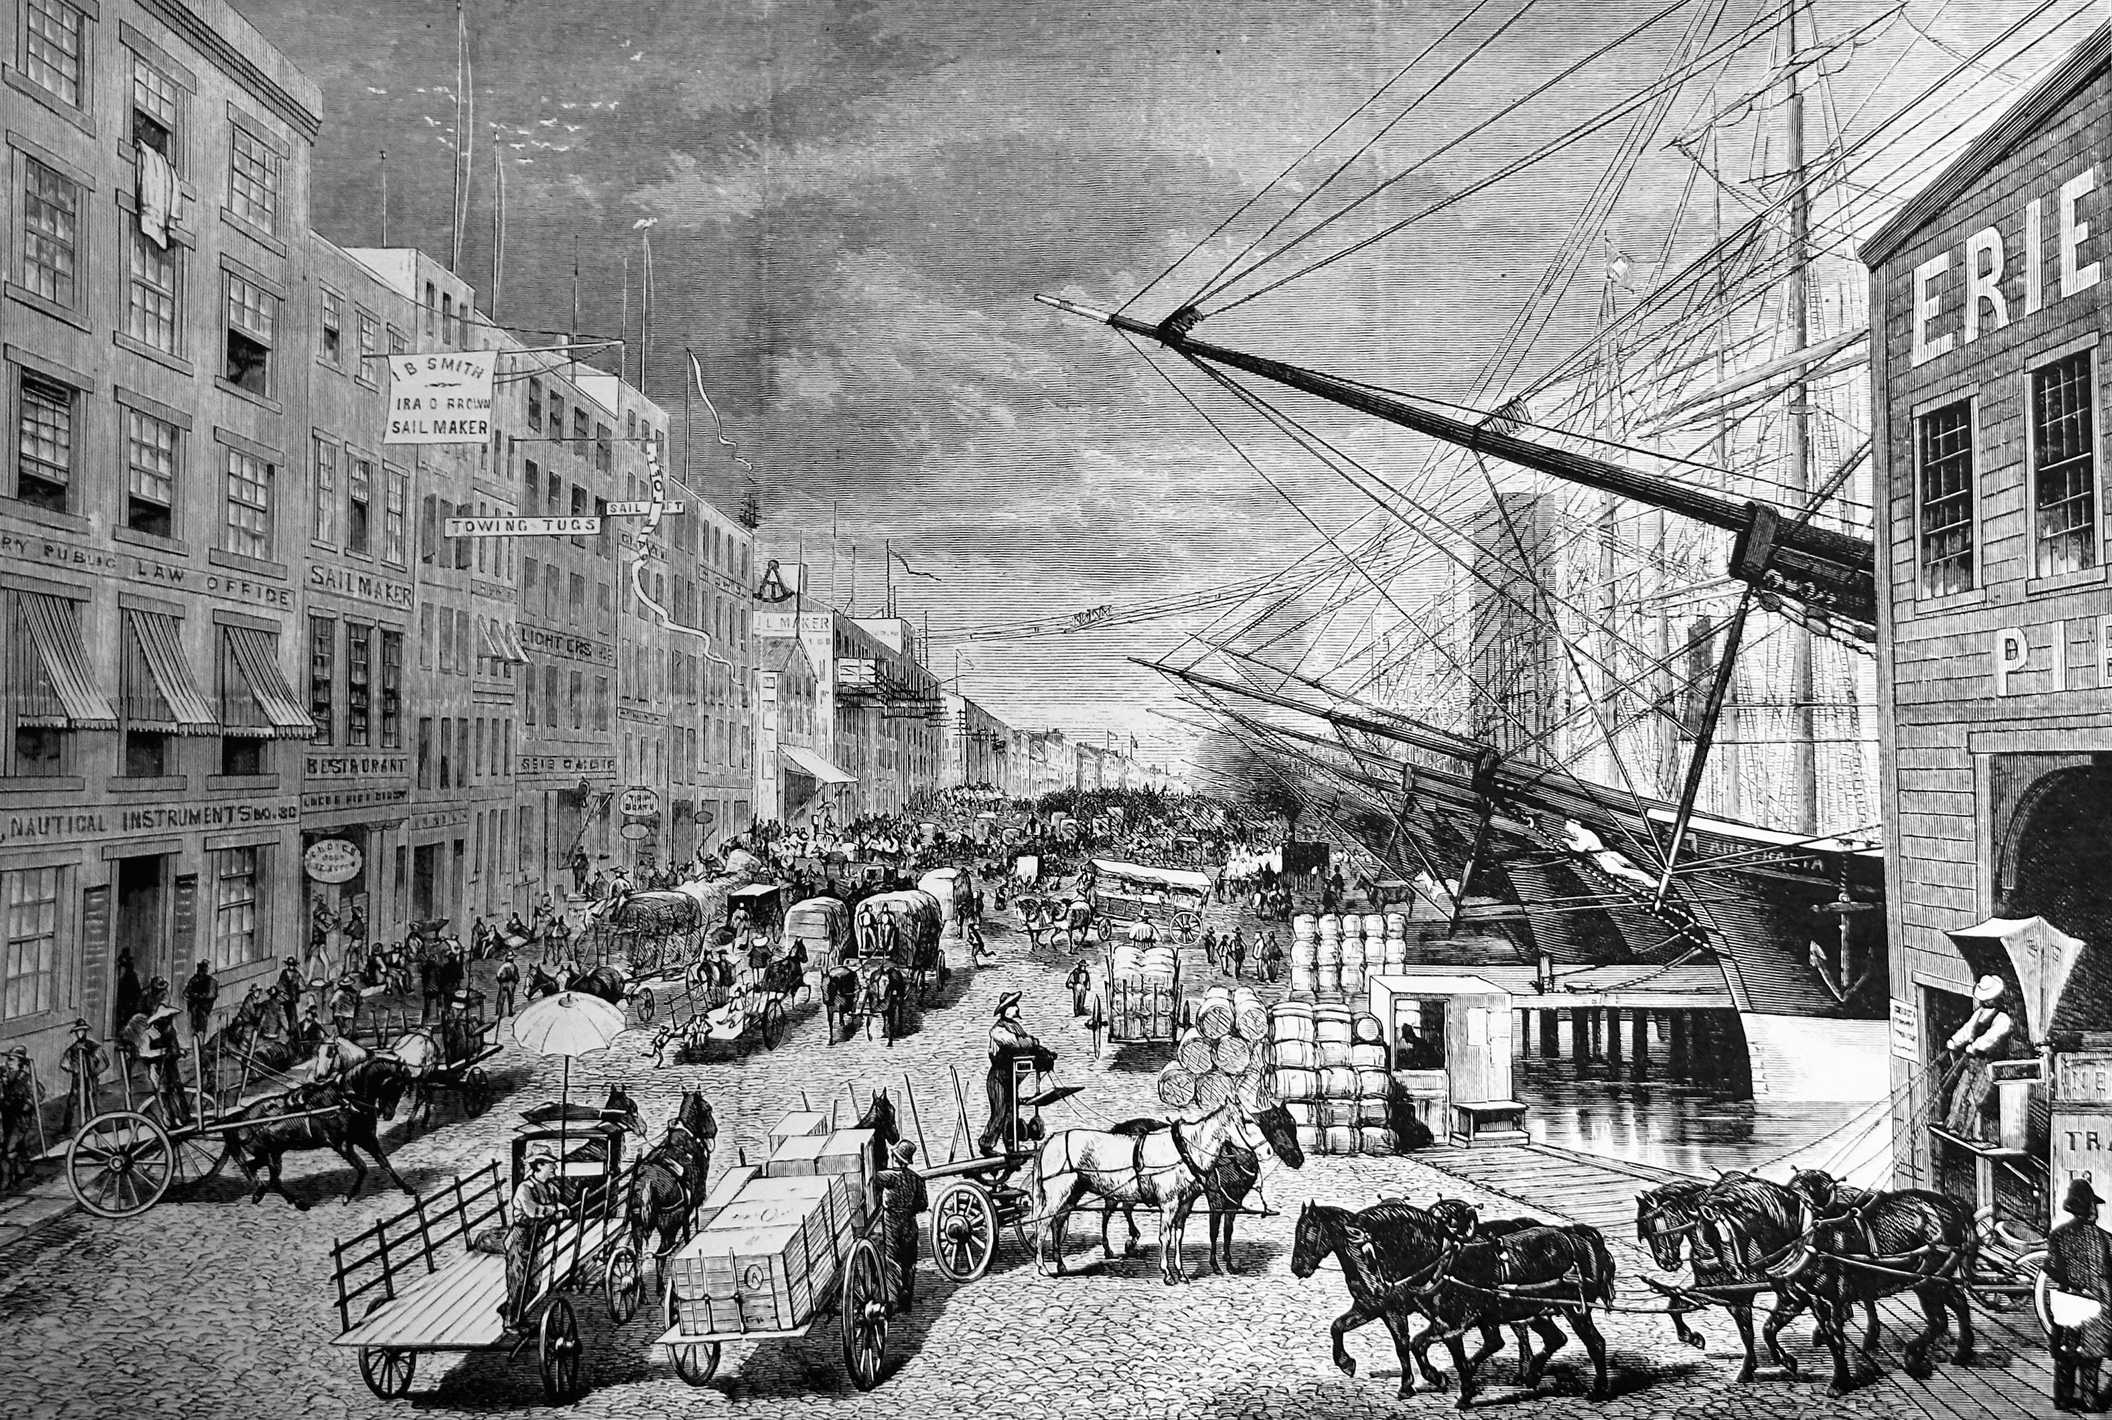 Illustration of ships docked at New York Harbor from the 19th century